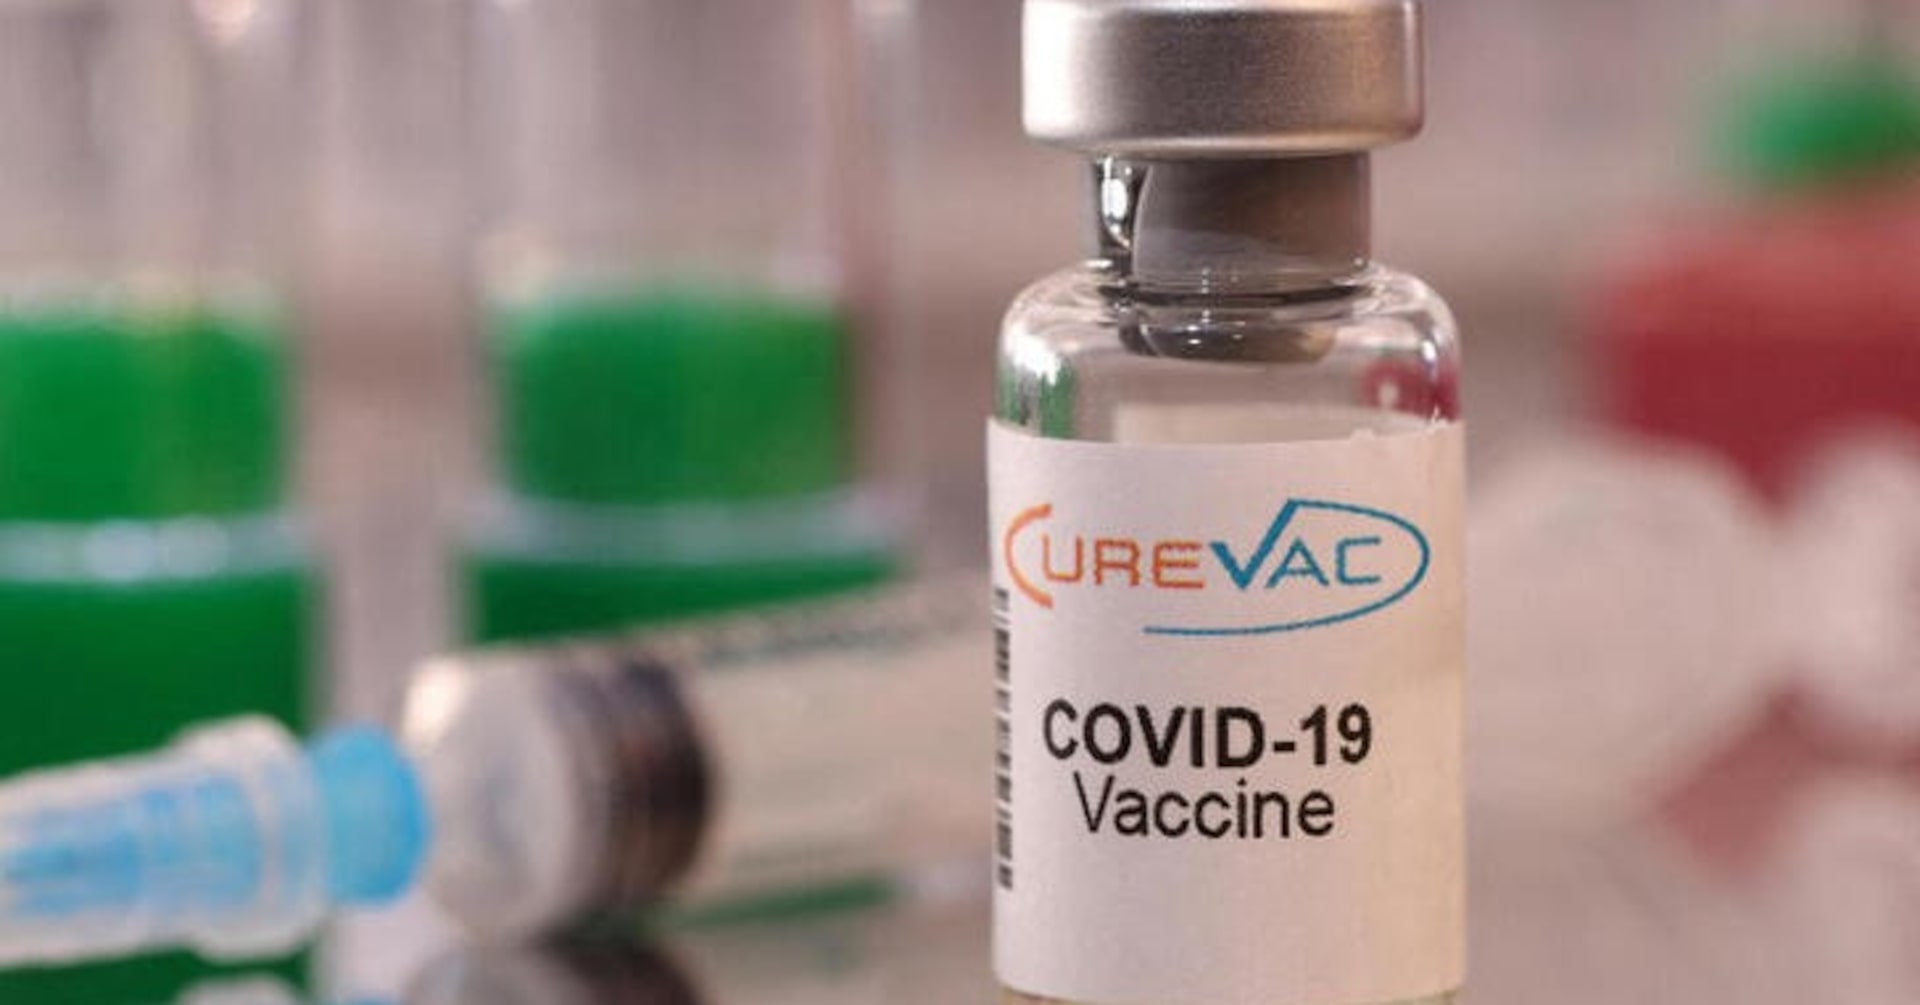 Acuitas, CureVac settle lawsuit over COVID-19 vaccine patent rights